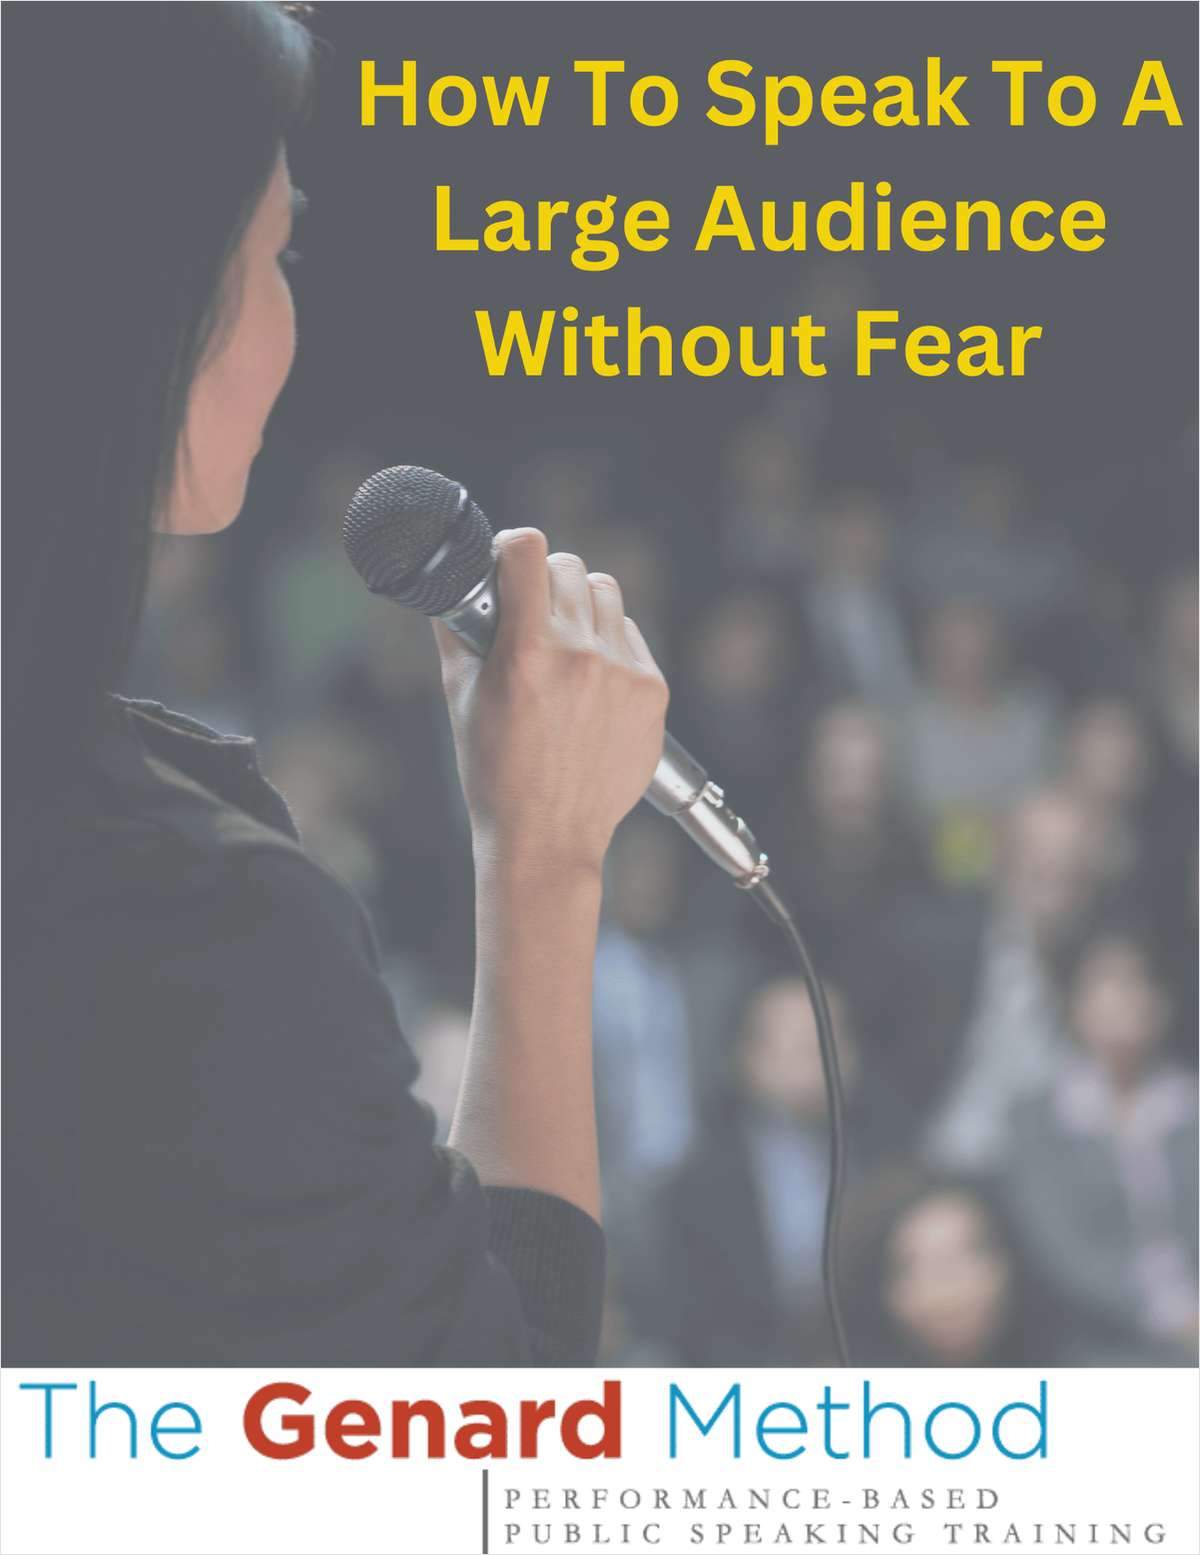 How To Speak To A Large Audience Without Fear